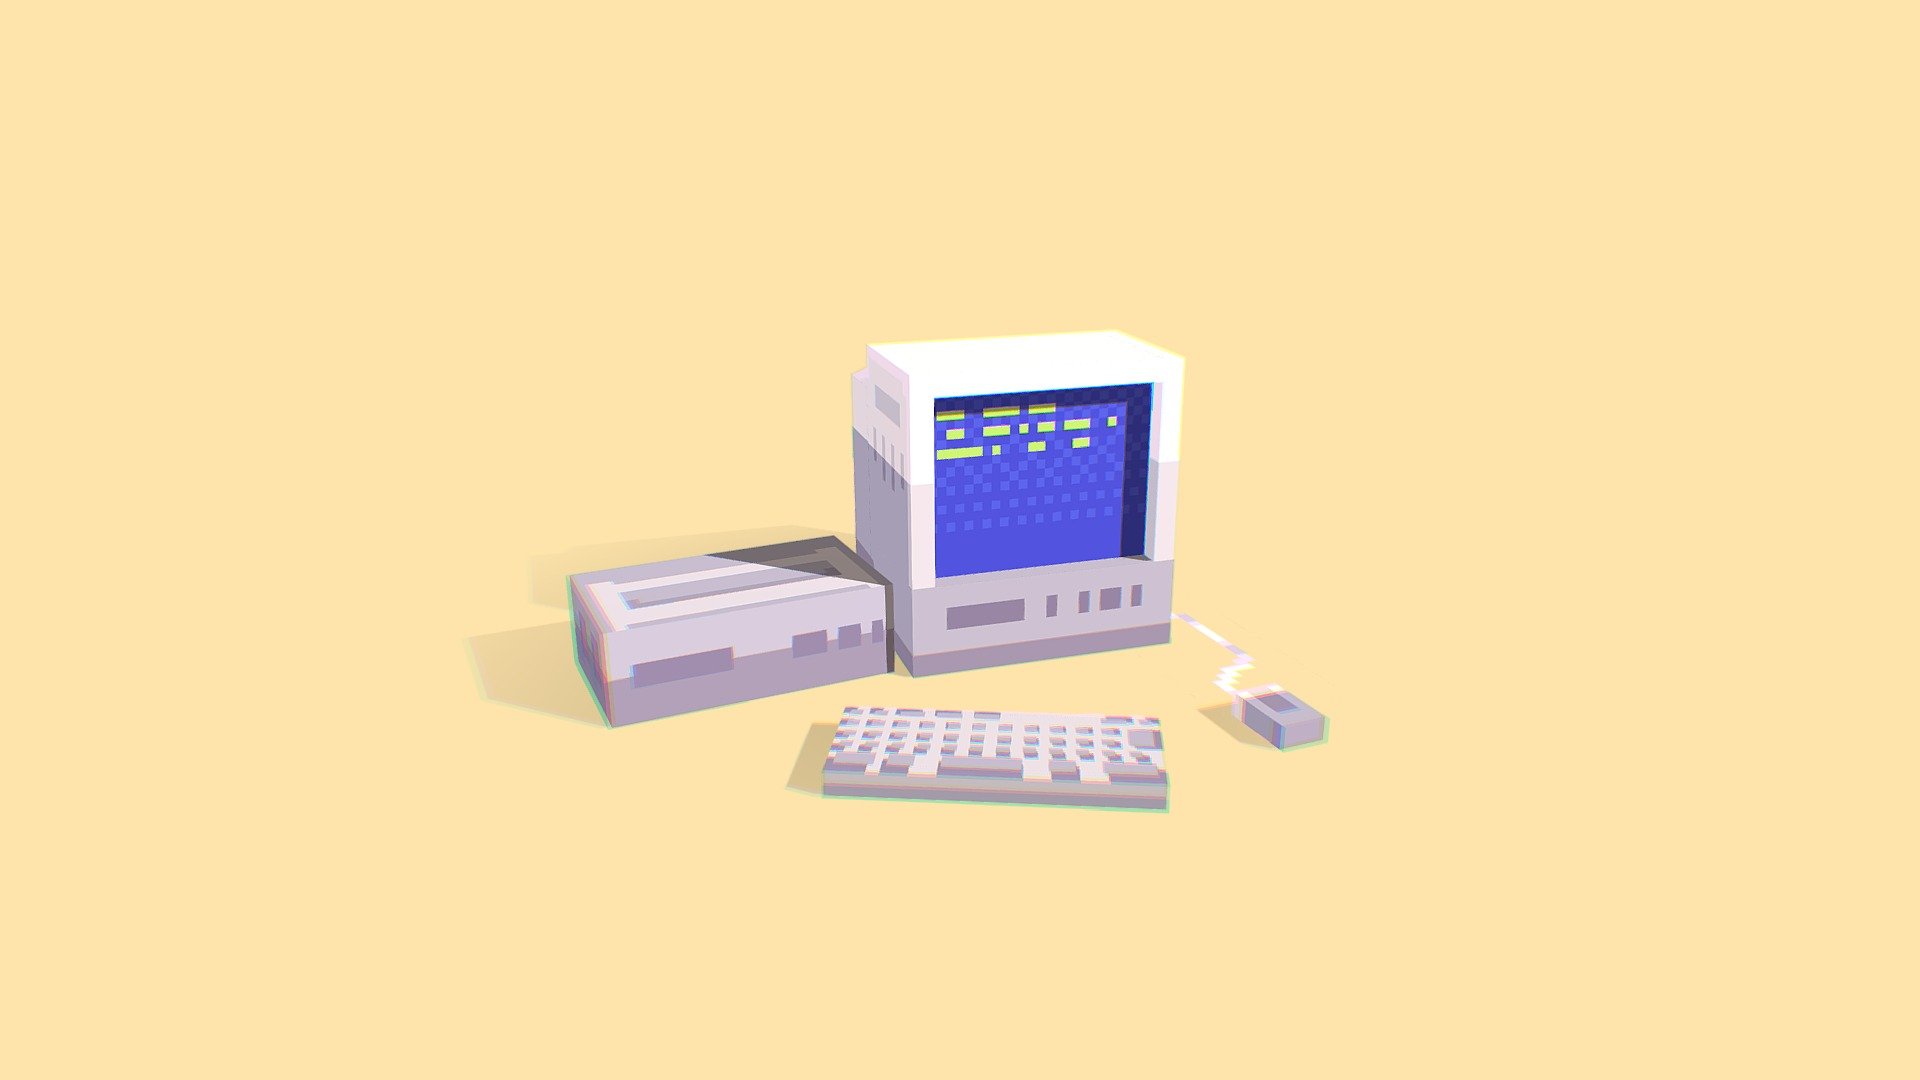 A really old, slow, classic, vintage computer made in Blockbench - Vintage Computer - 3D model by Thomas (@ttodgers1) 3d model